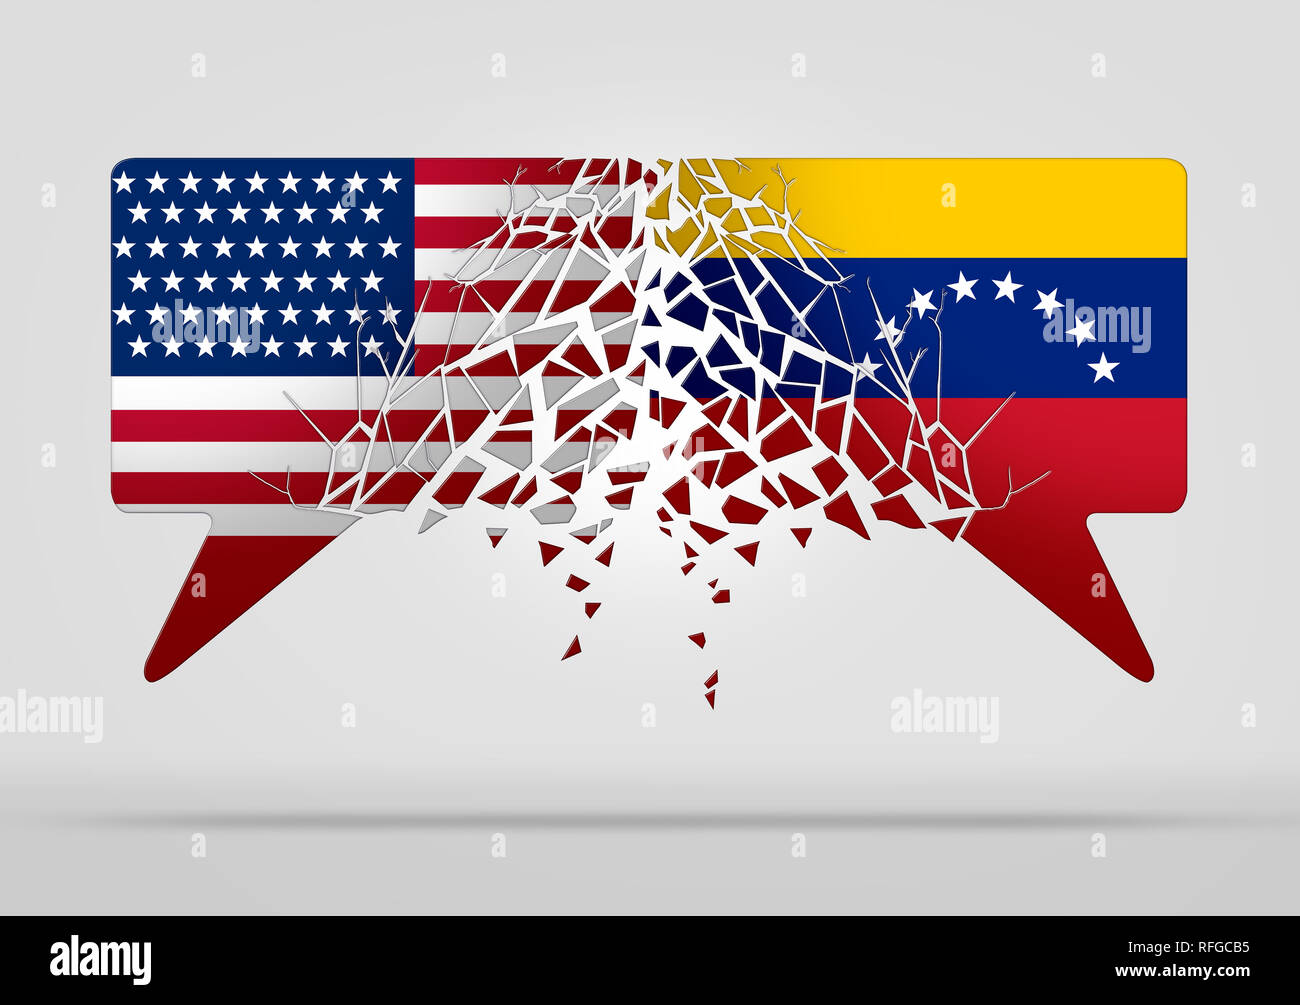 Venezuela United States conflict and diplomatic crisis or Venezuelan political situation as uncertainty in Caracas and breakdown of diplomacy. Stock Photo